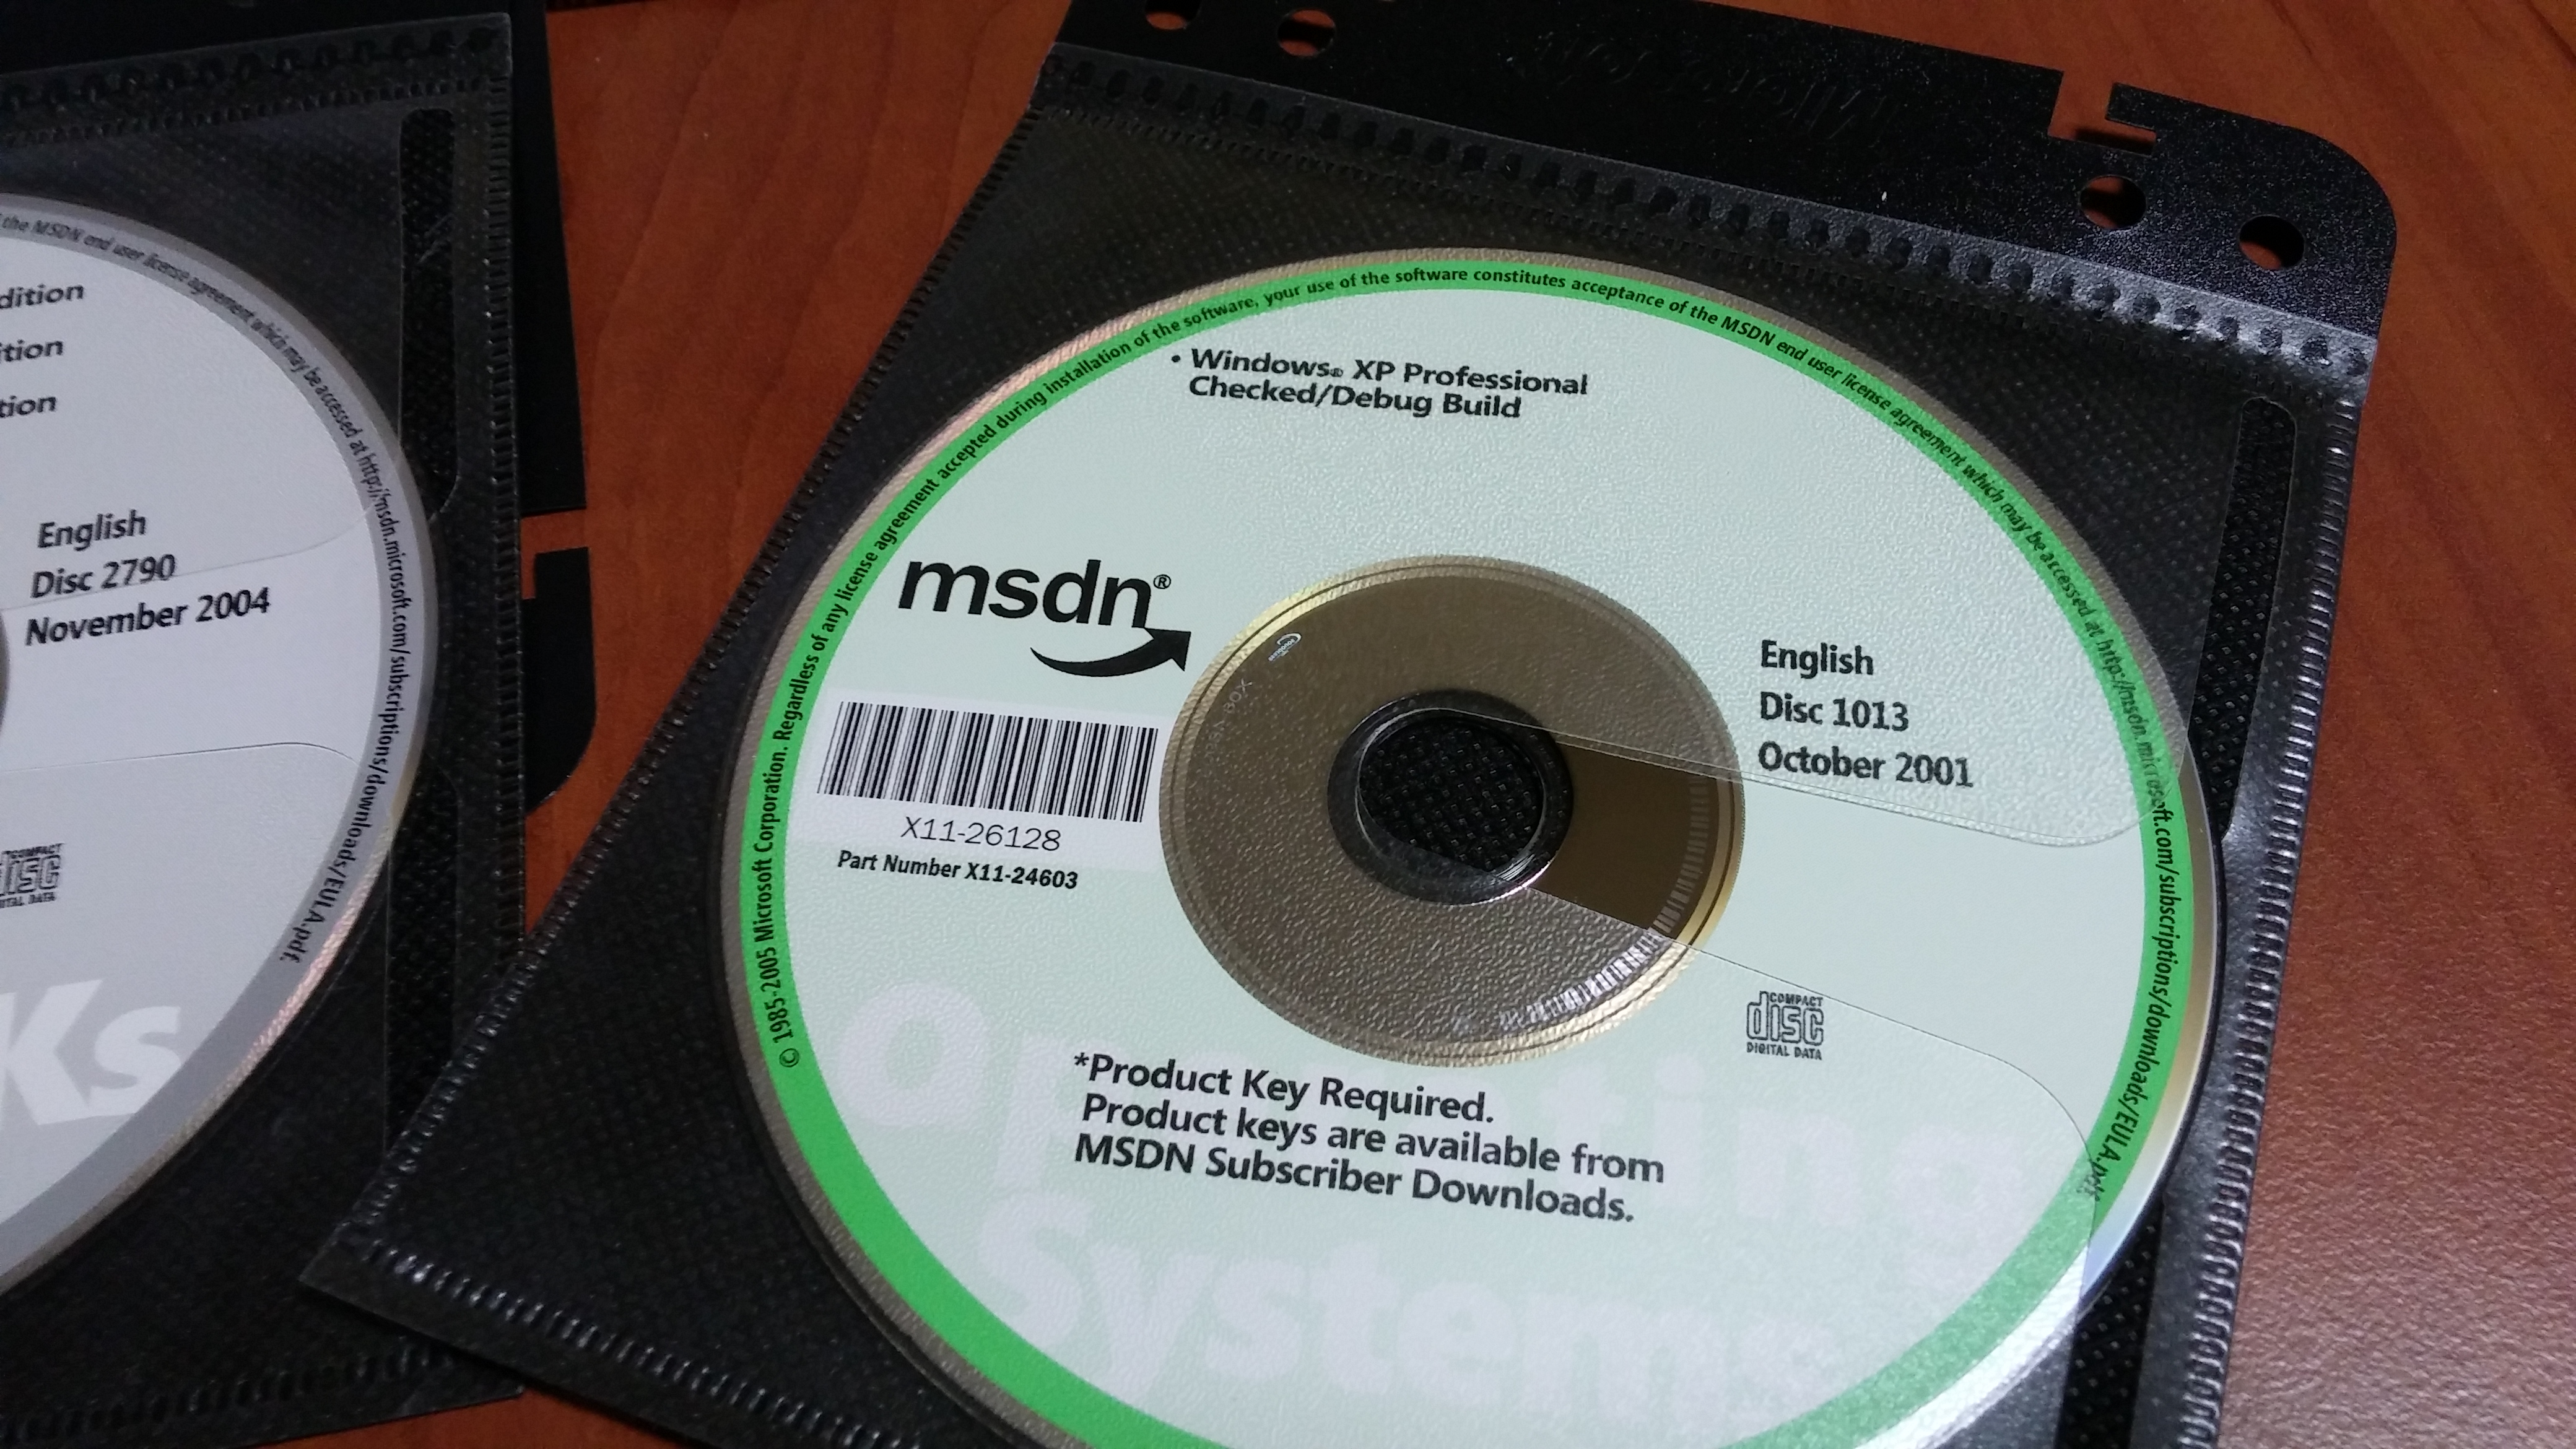 MSDN CD disk from October 2001